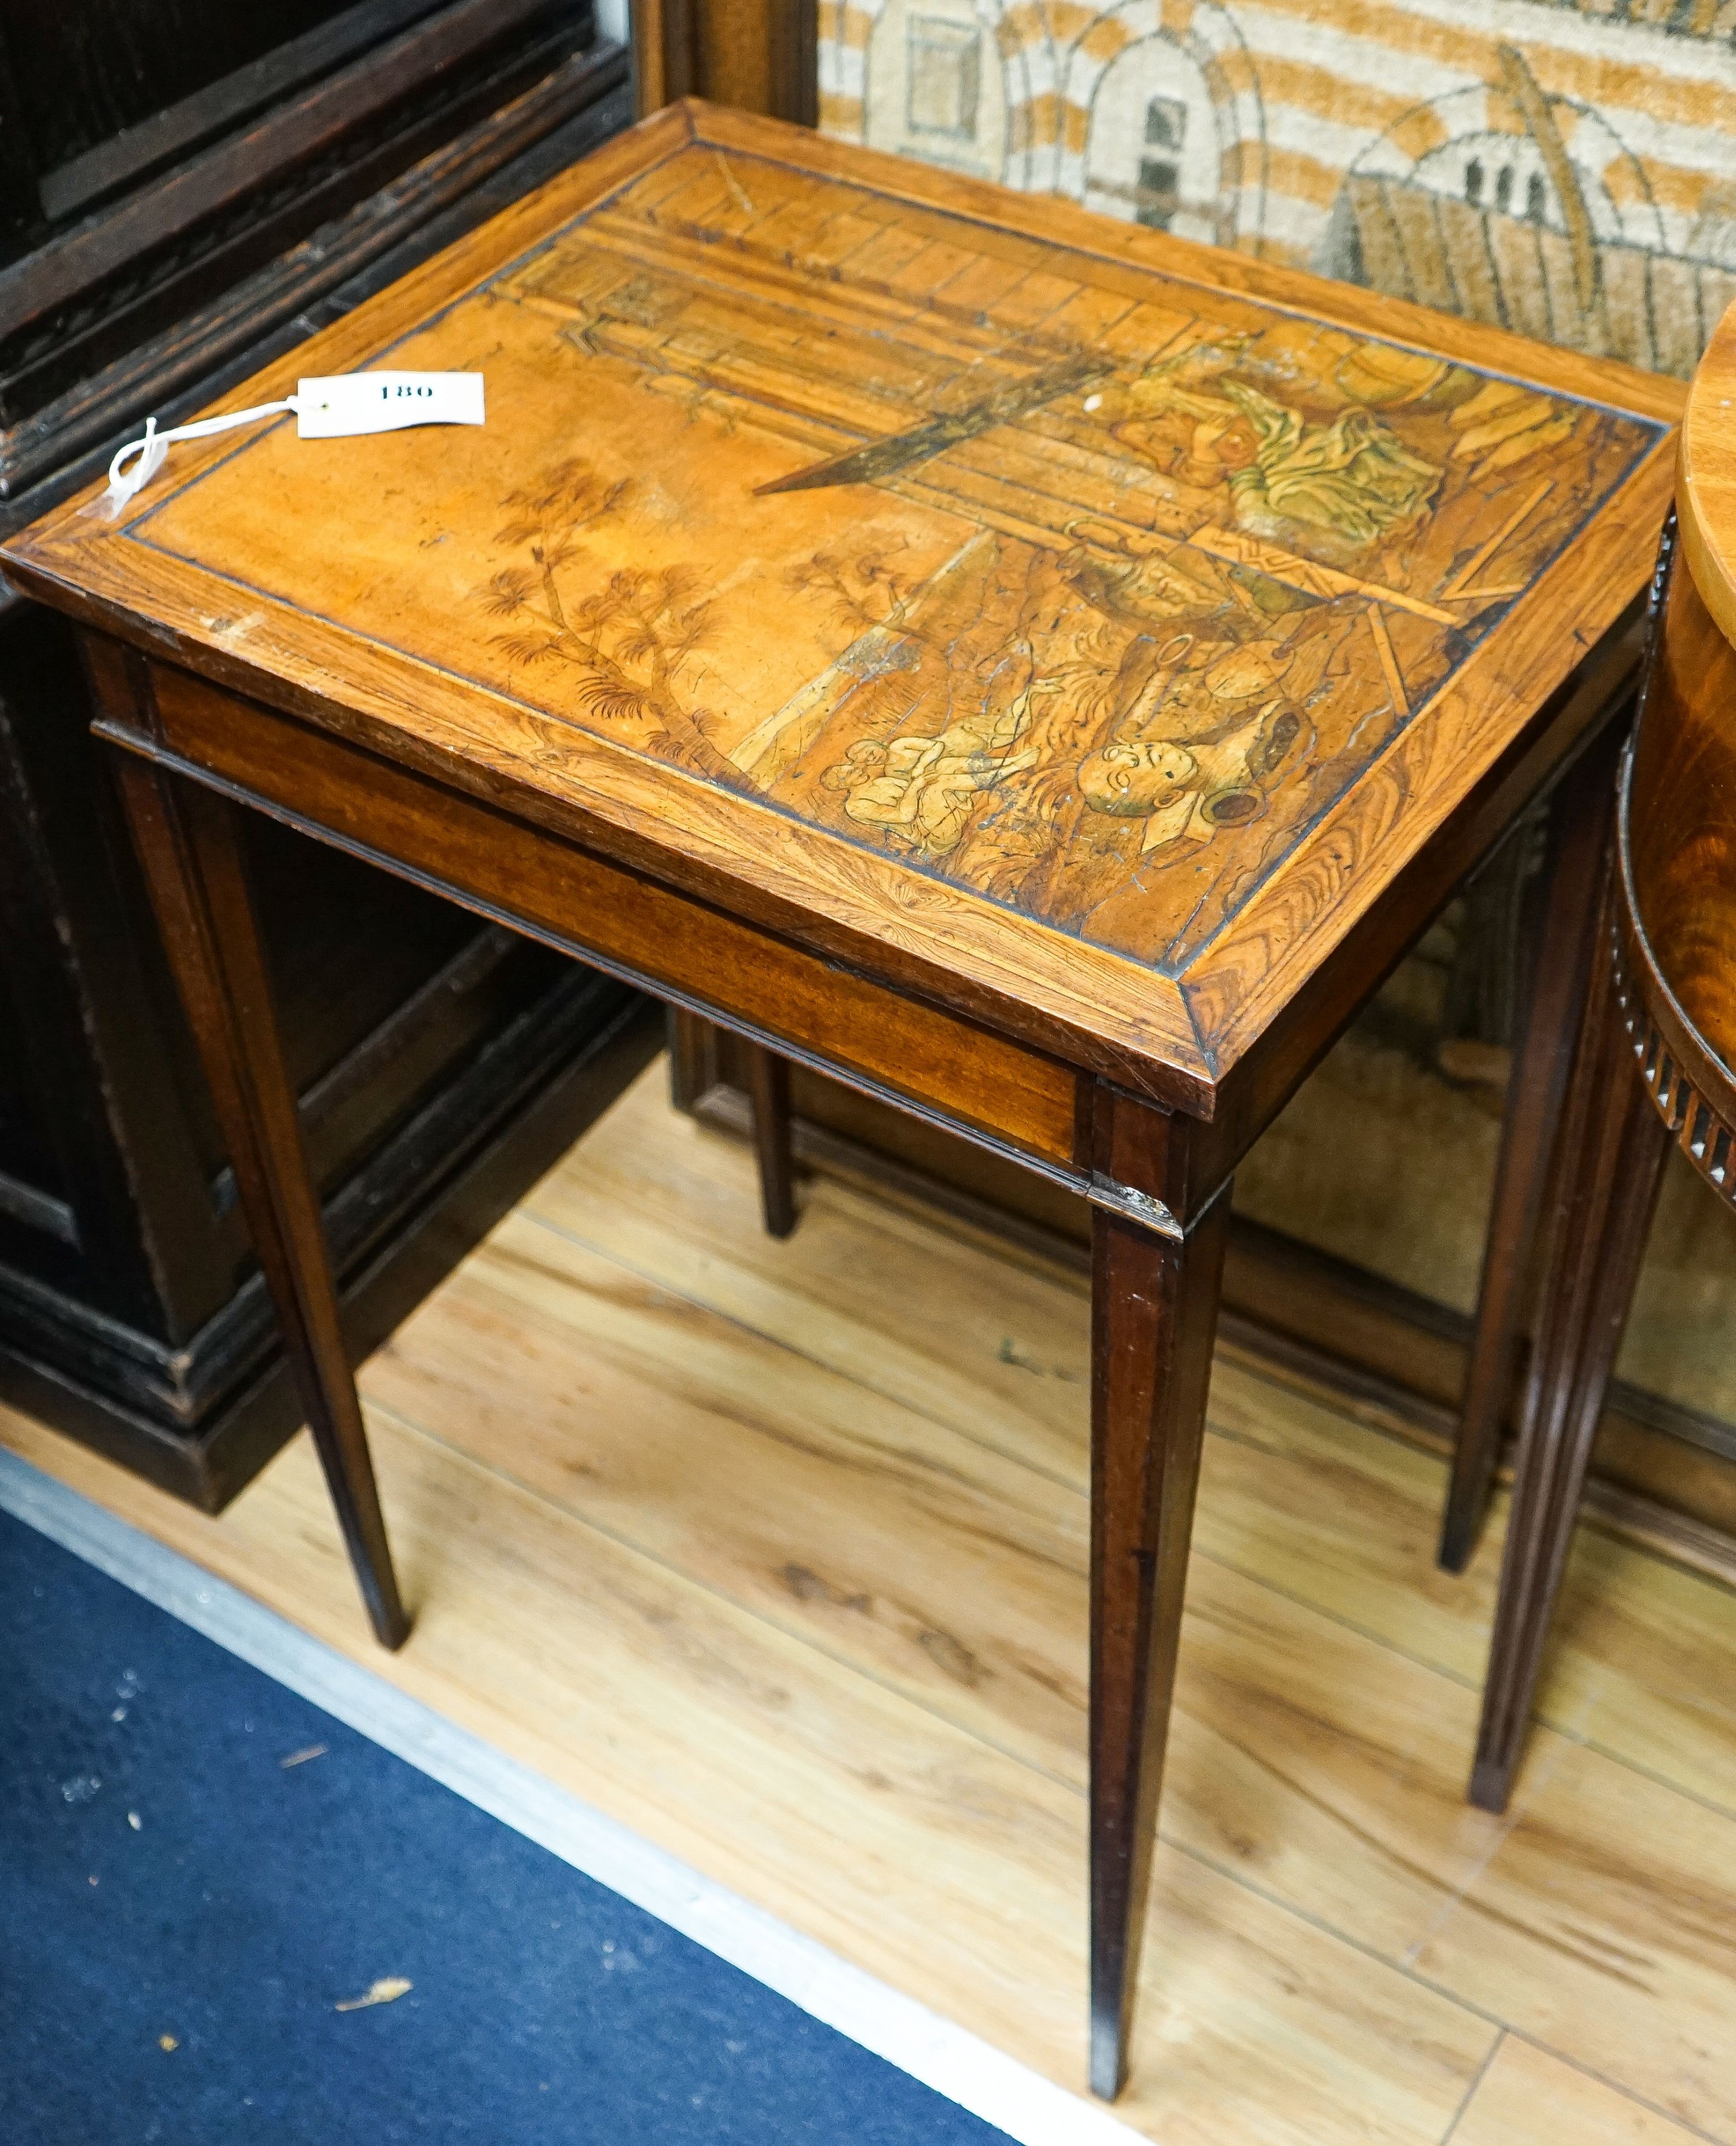 A 19th century Continental walnut side table, the top with penwork decoration and a tinted scene of figures among Roman ruins, width 41cm, depth 50cm, height 69cm